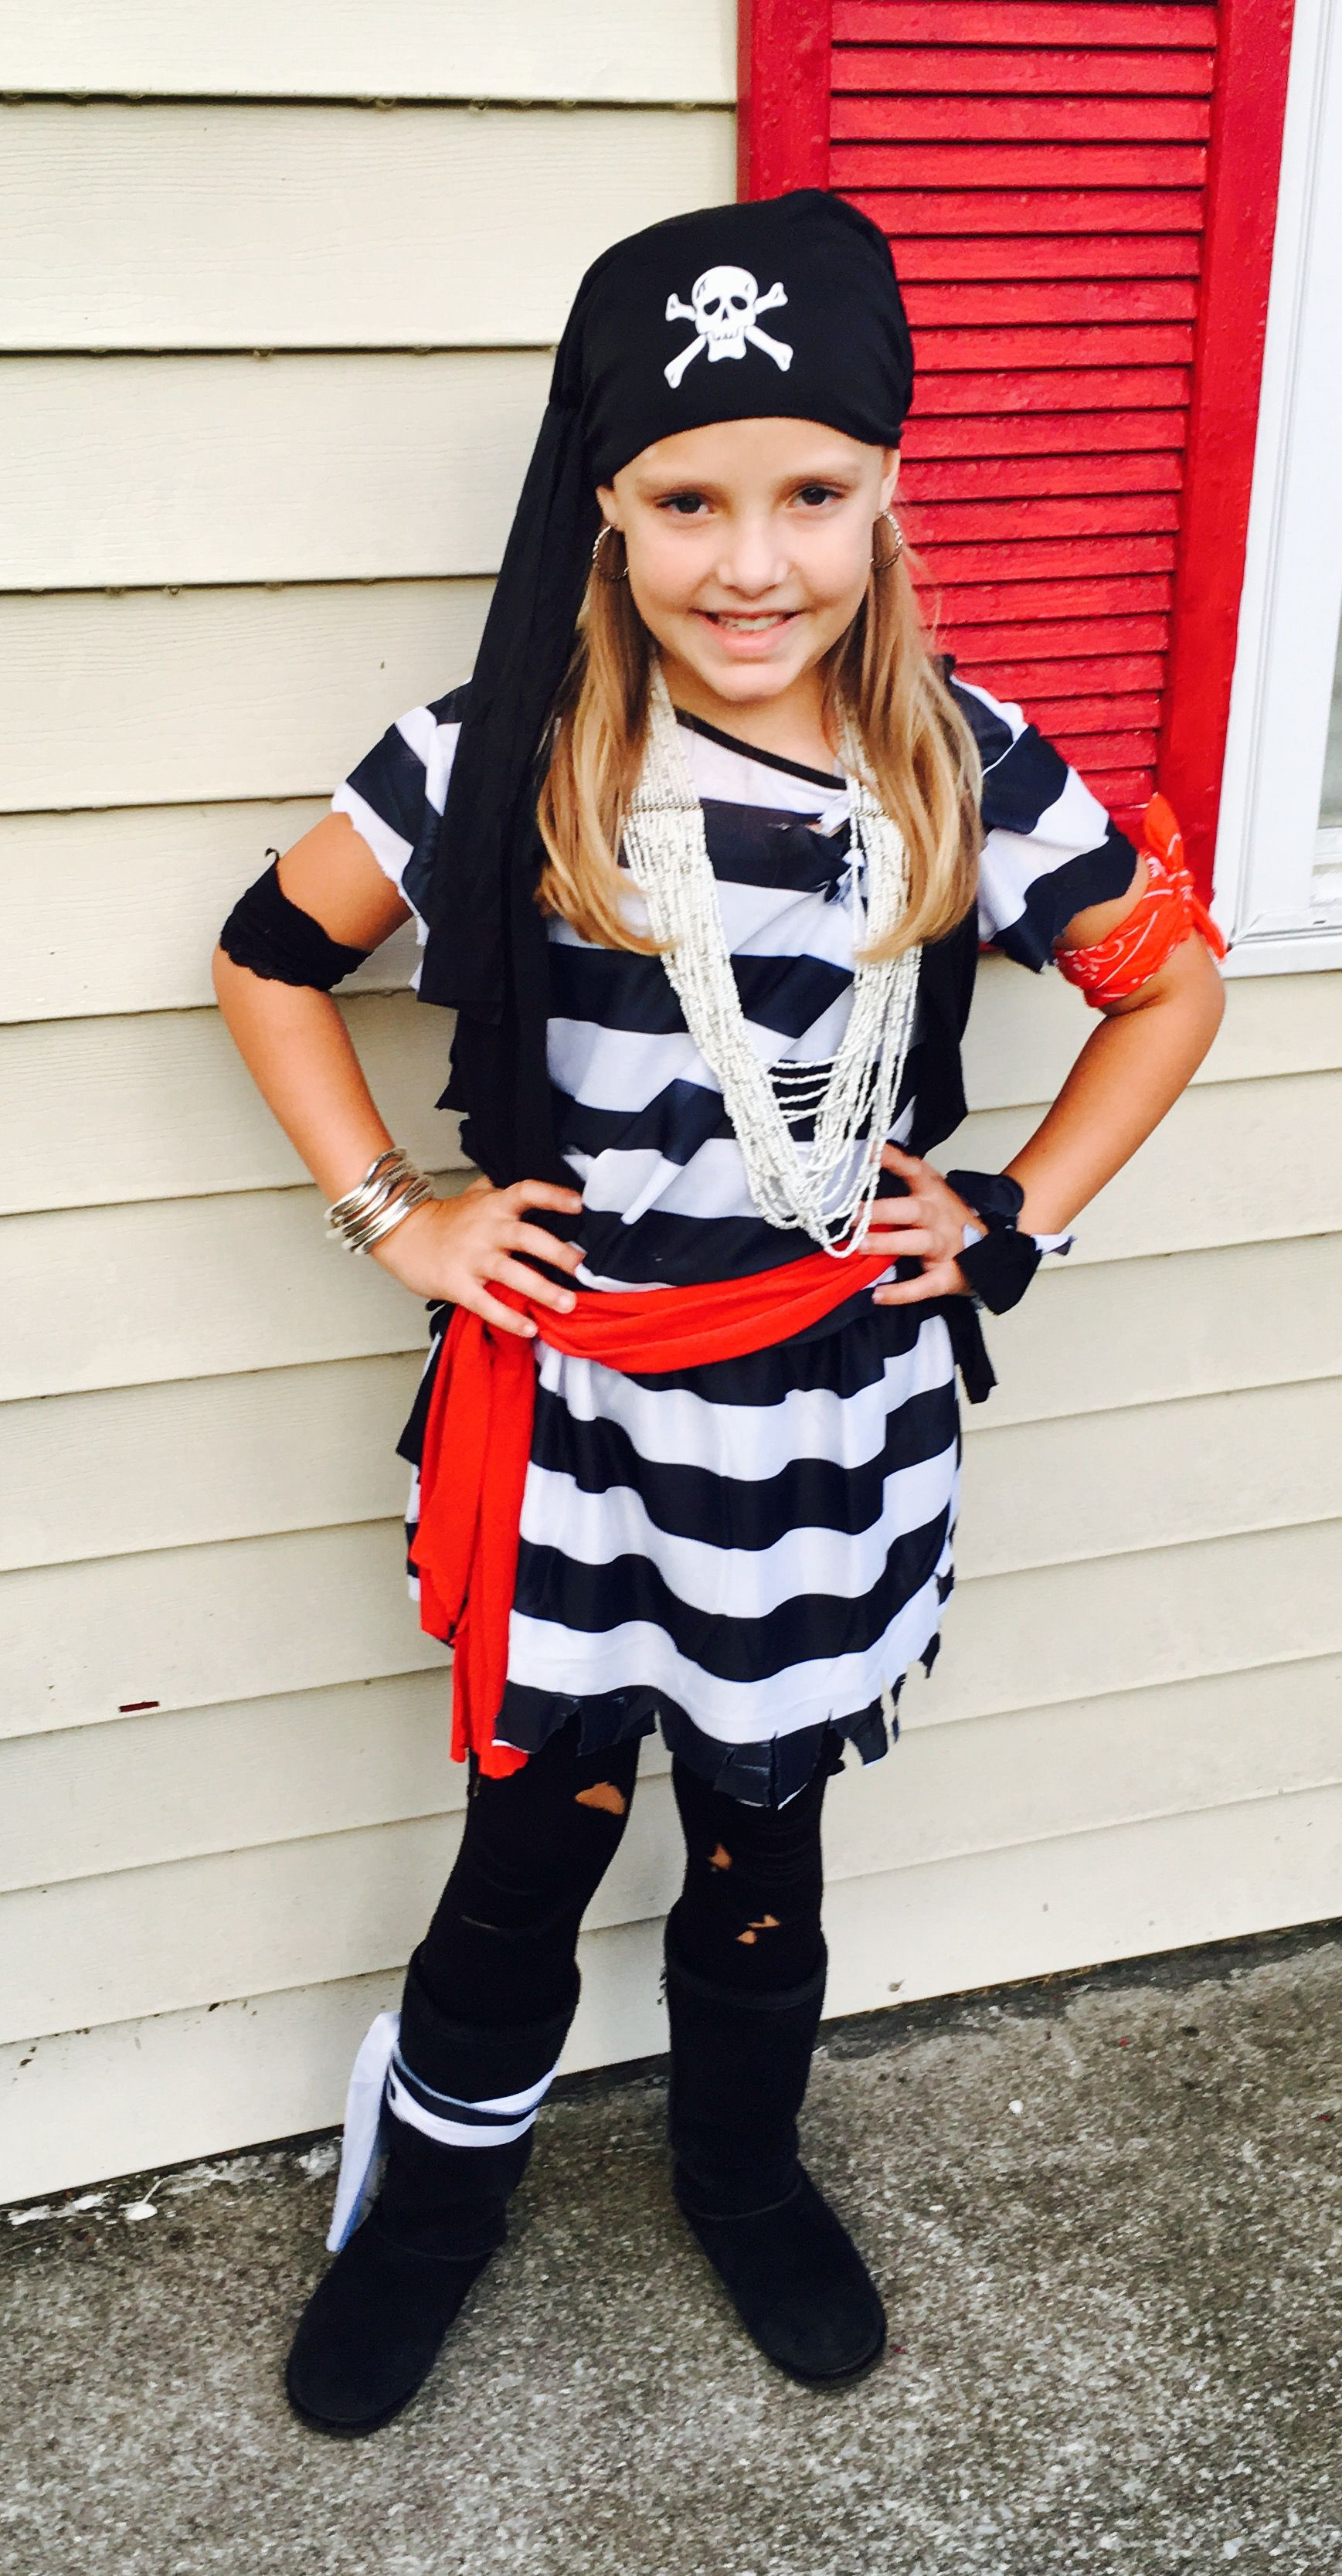 Toddler Pirate Costume DIY
 Easy girl s pirate costume made from cheap adult size